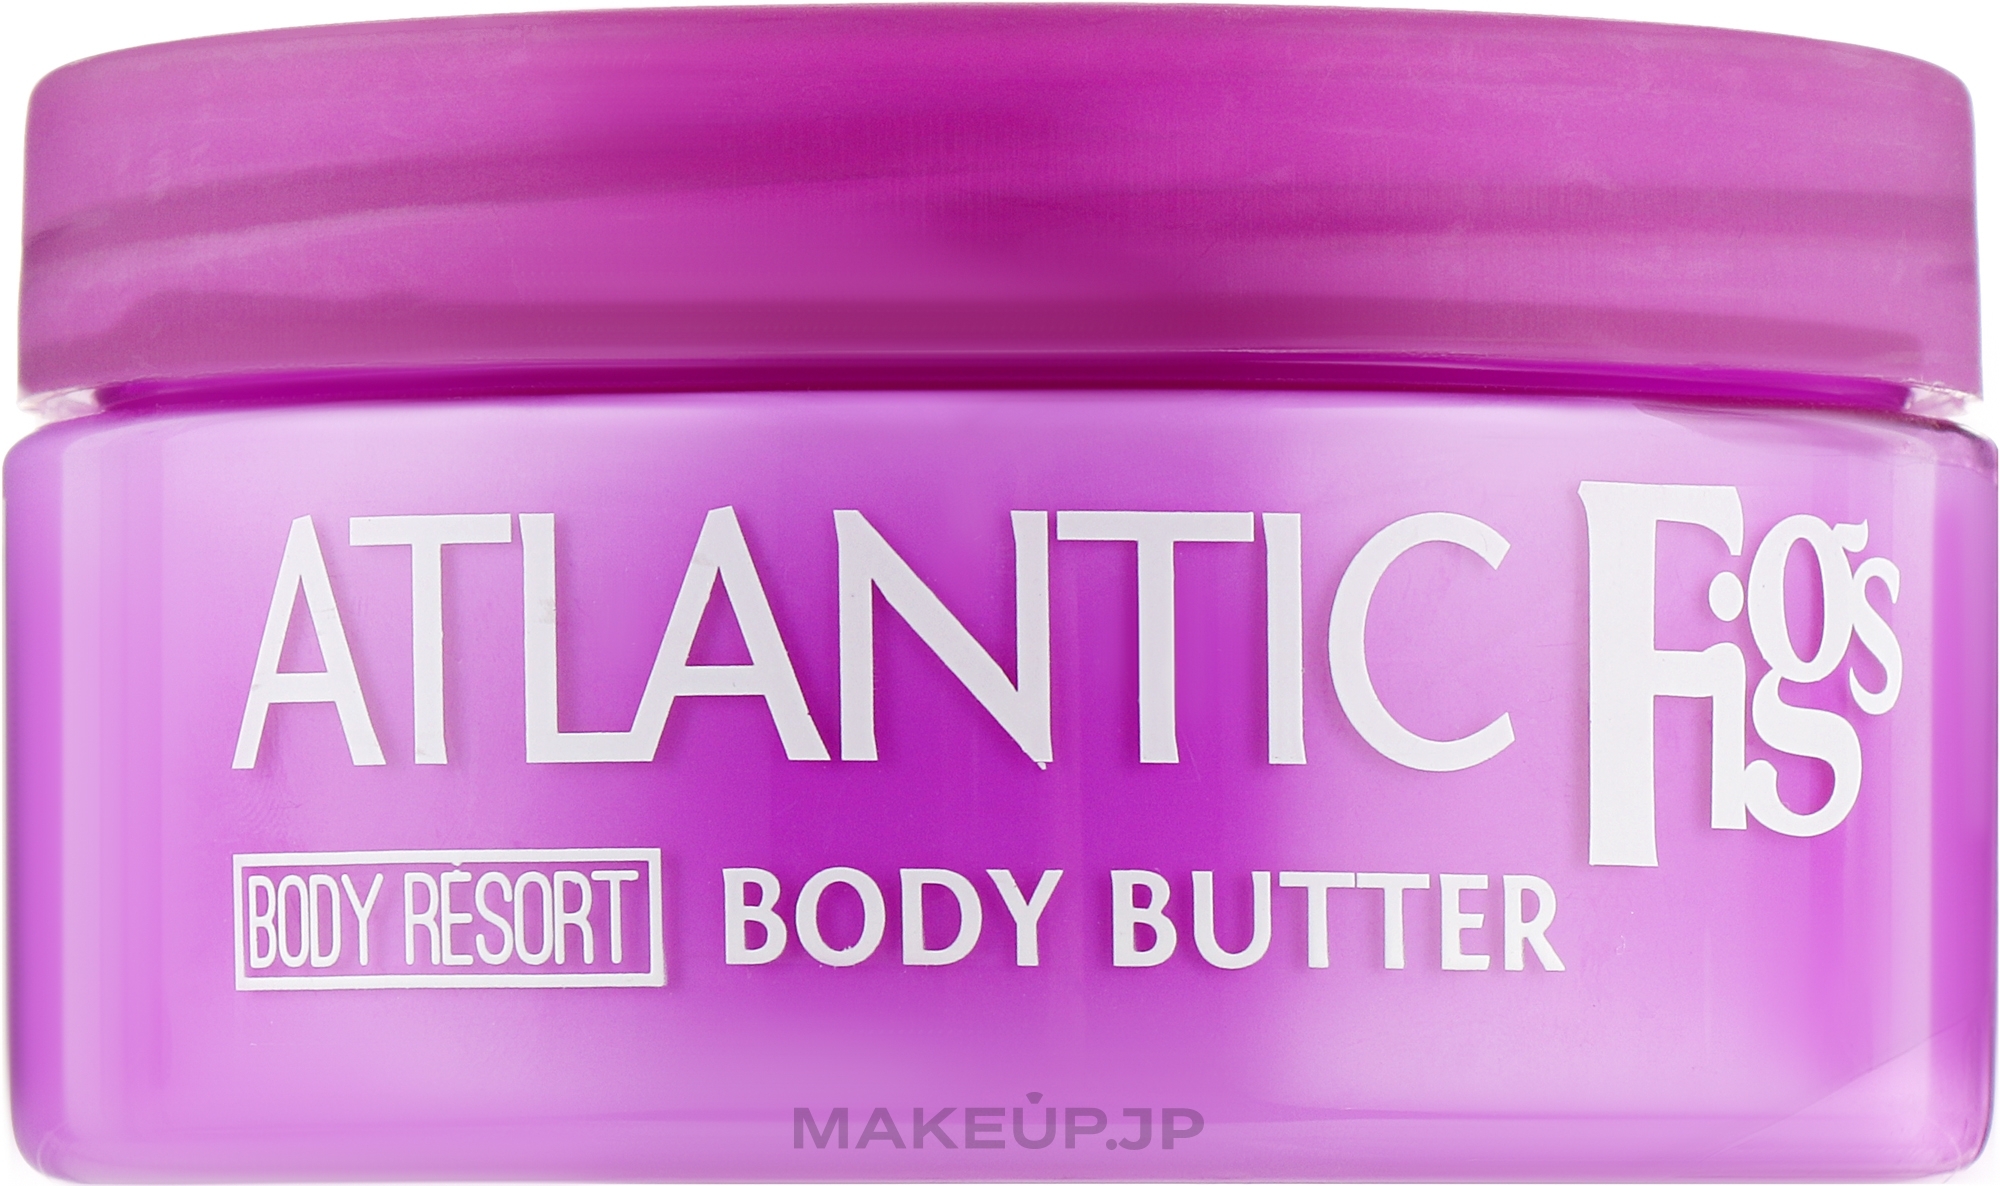 Atlantic Fig Body Butter - Mades Cosmetics Body Resort Atlantic Figs Body Butter — photo 200 ml